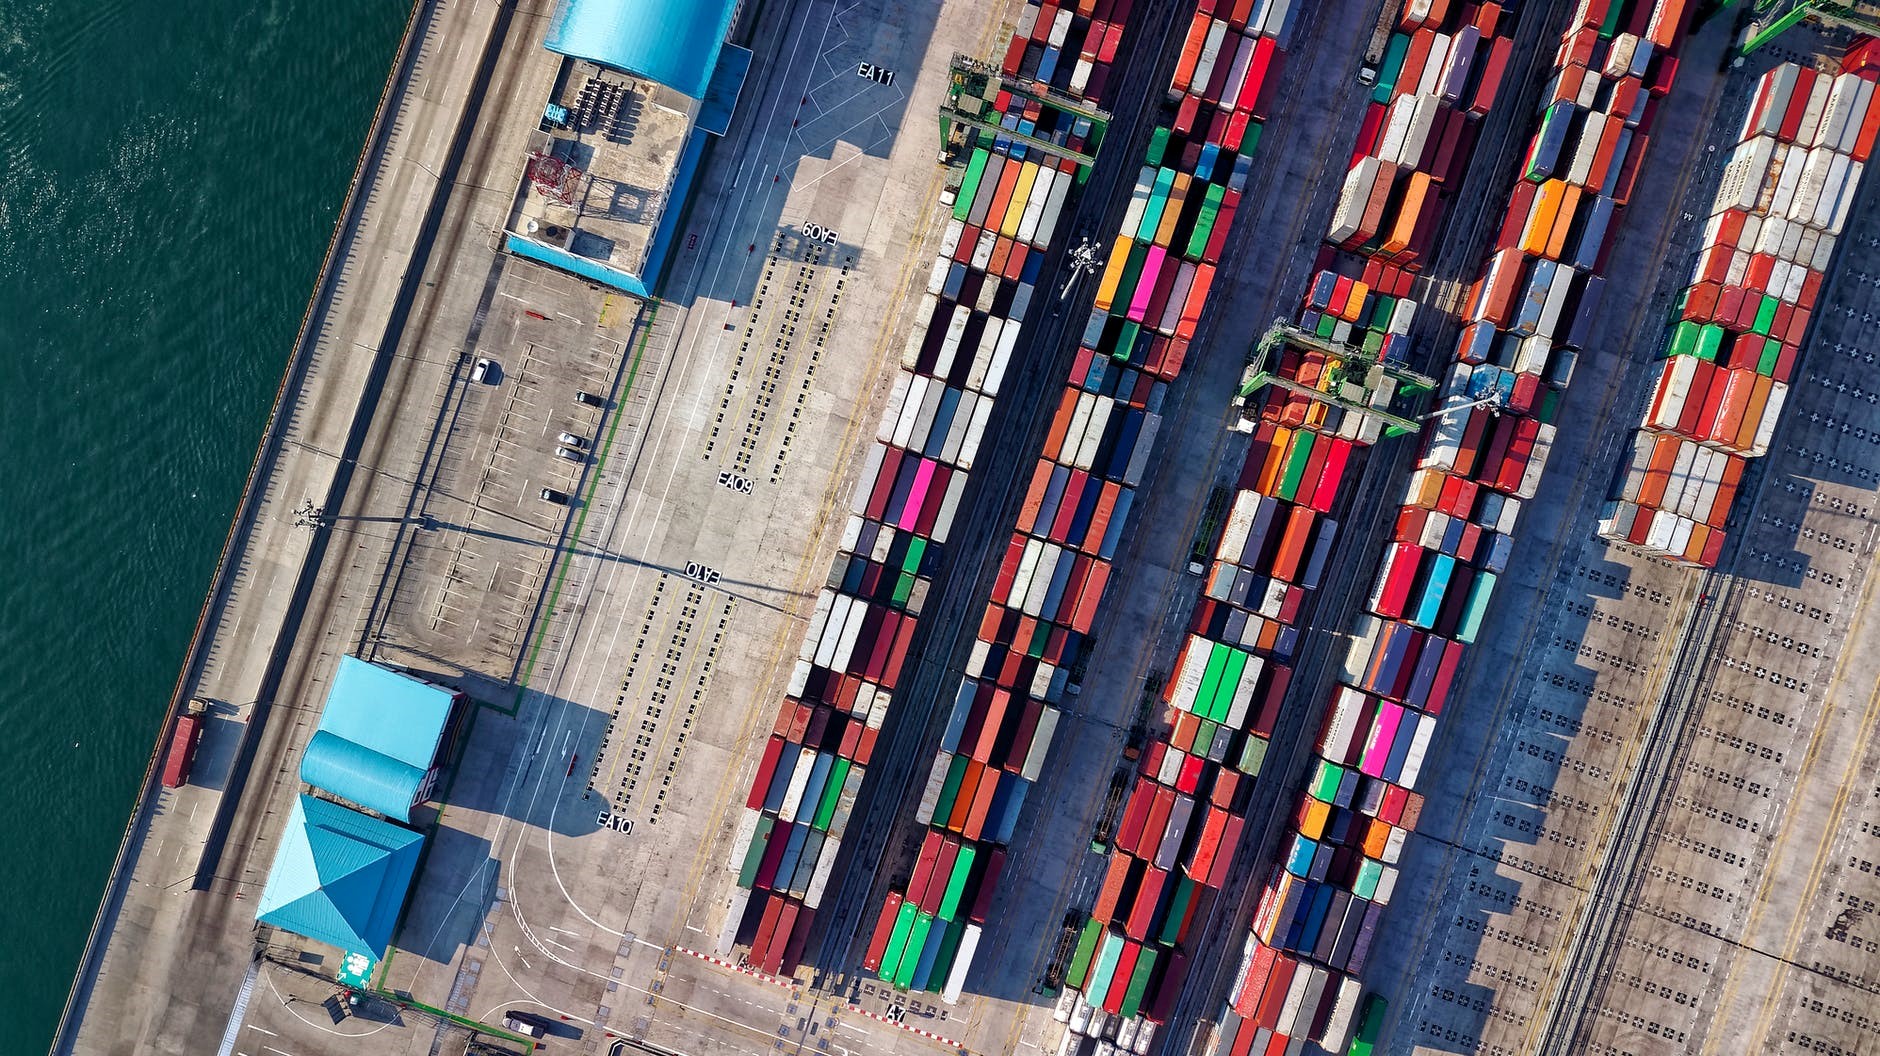 What are the emerging challenges for the global supply chain?